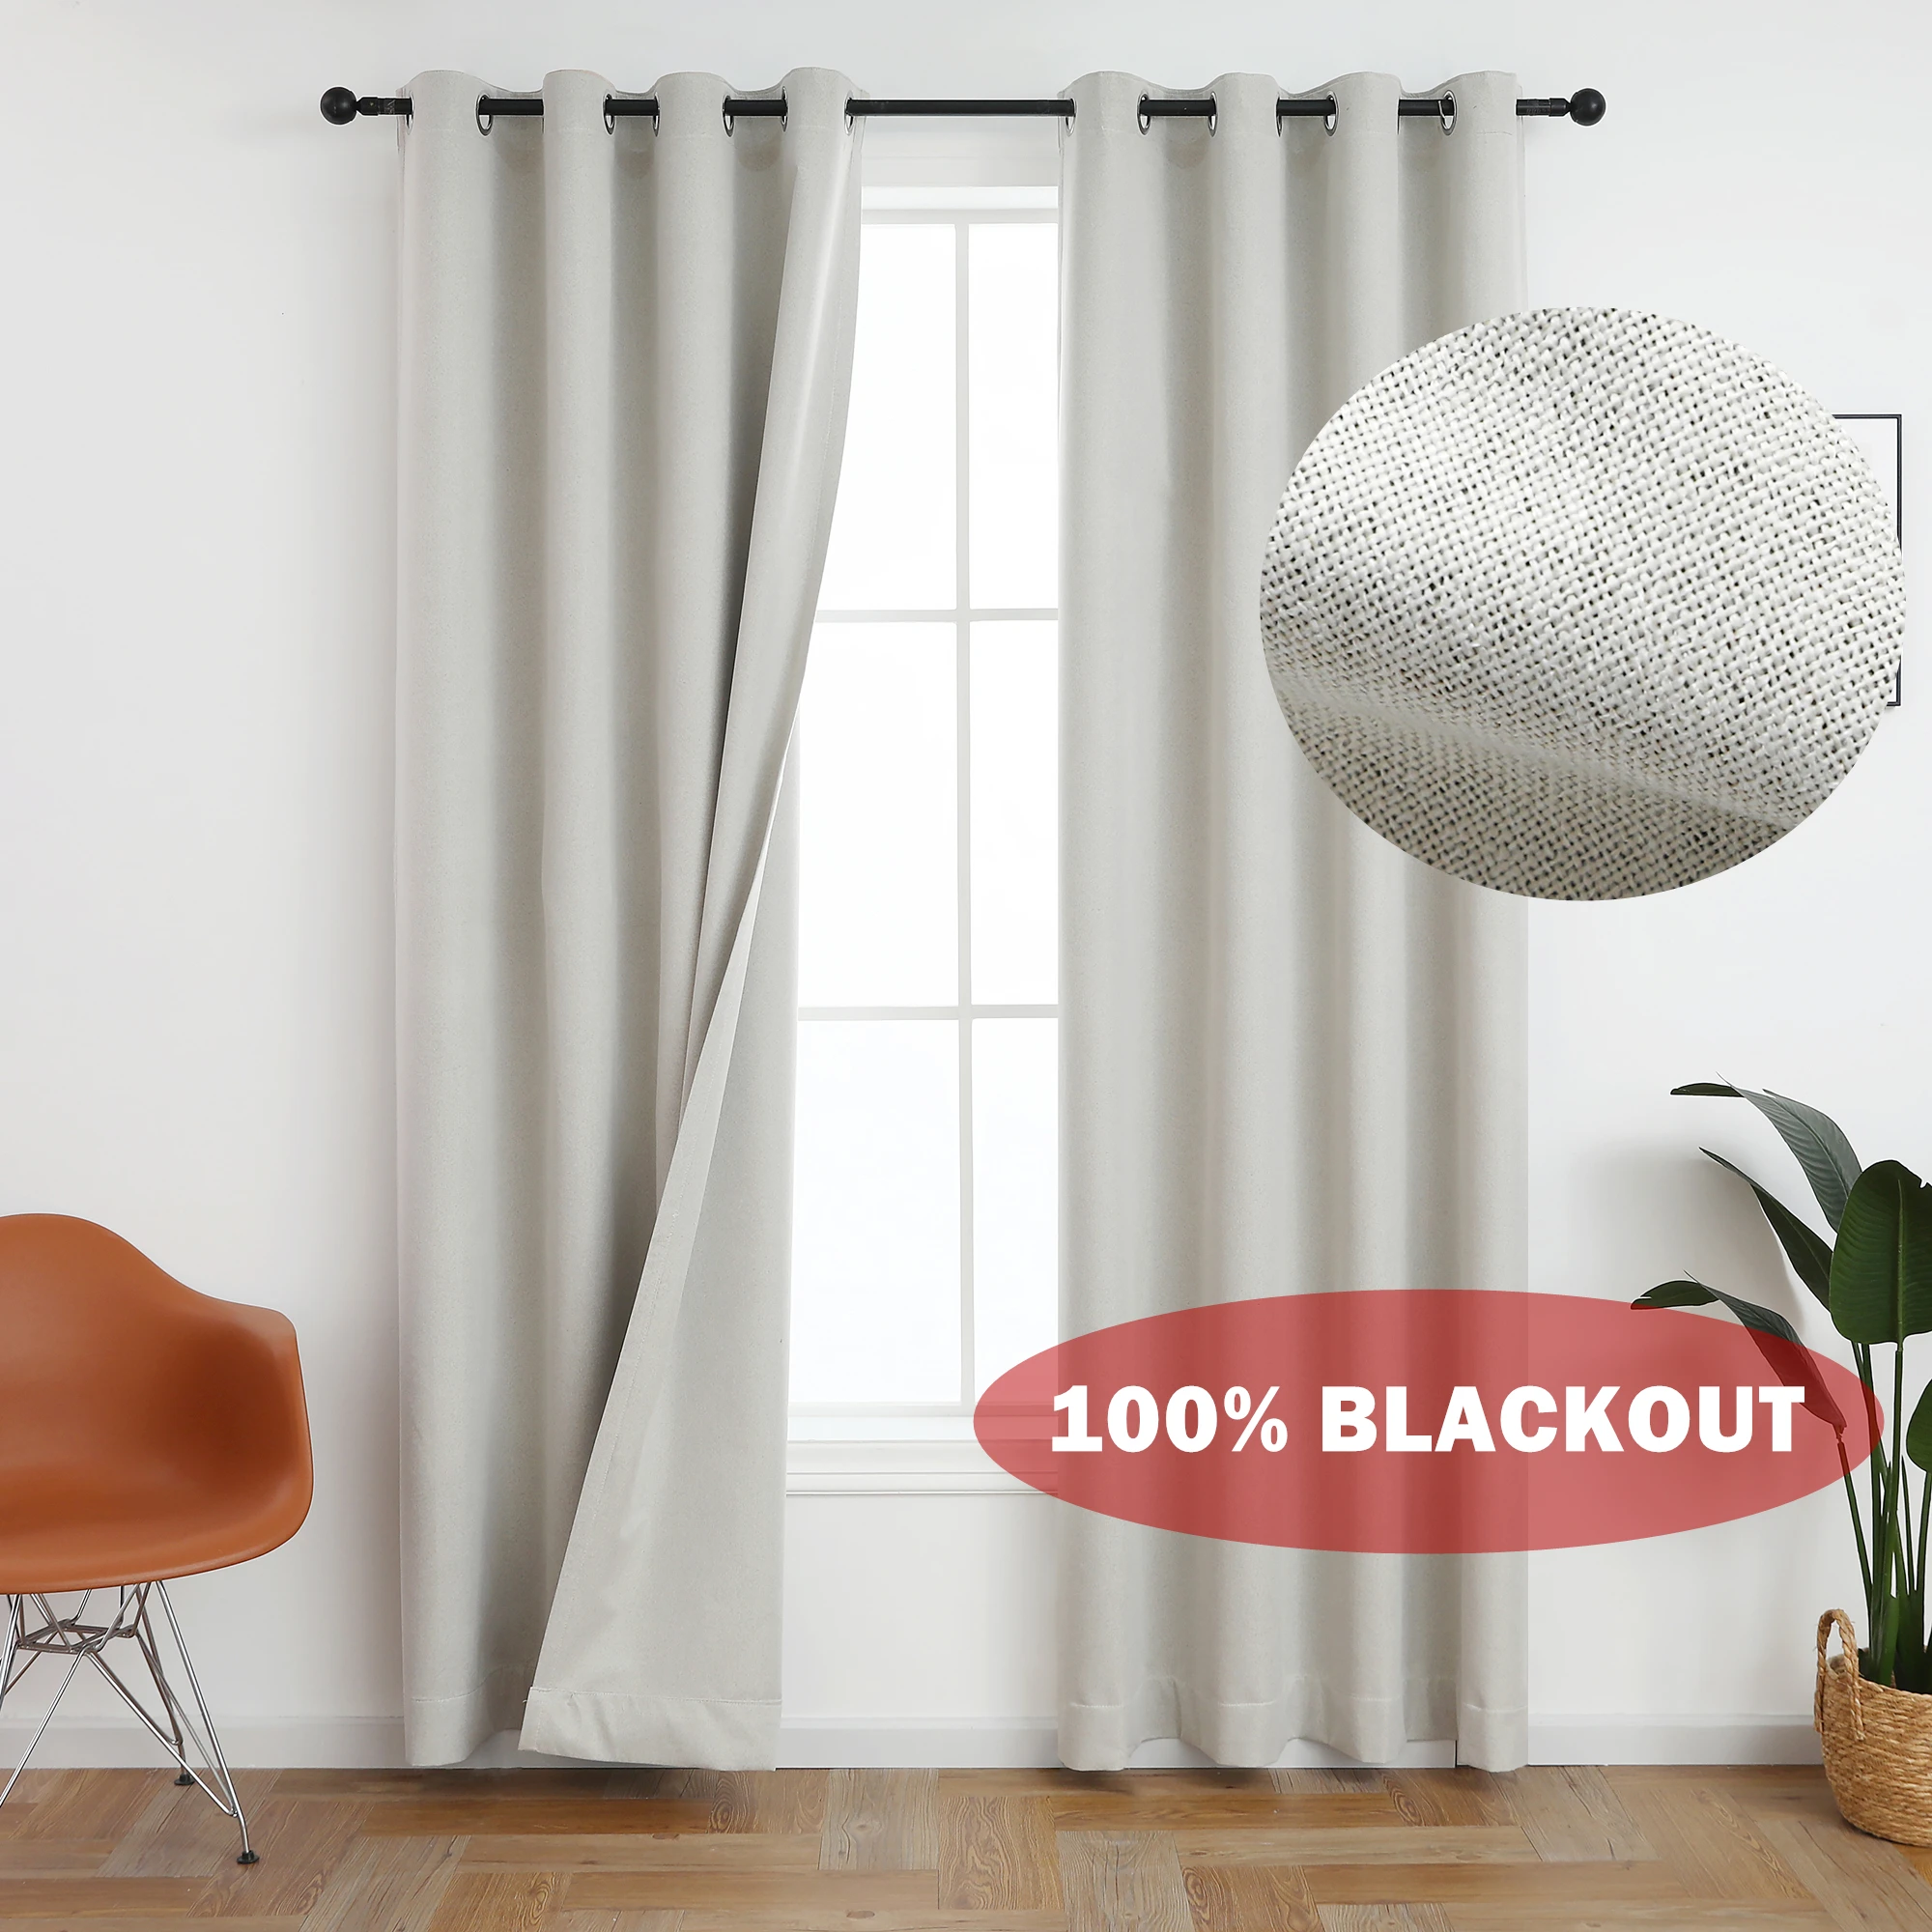 310cm Height 100% Blackout Solid Color Soundproof Curtain Blackout Faux Linen Curtains For Bedroom Living Room Drapes Window